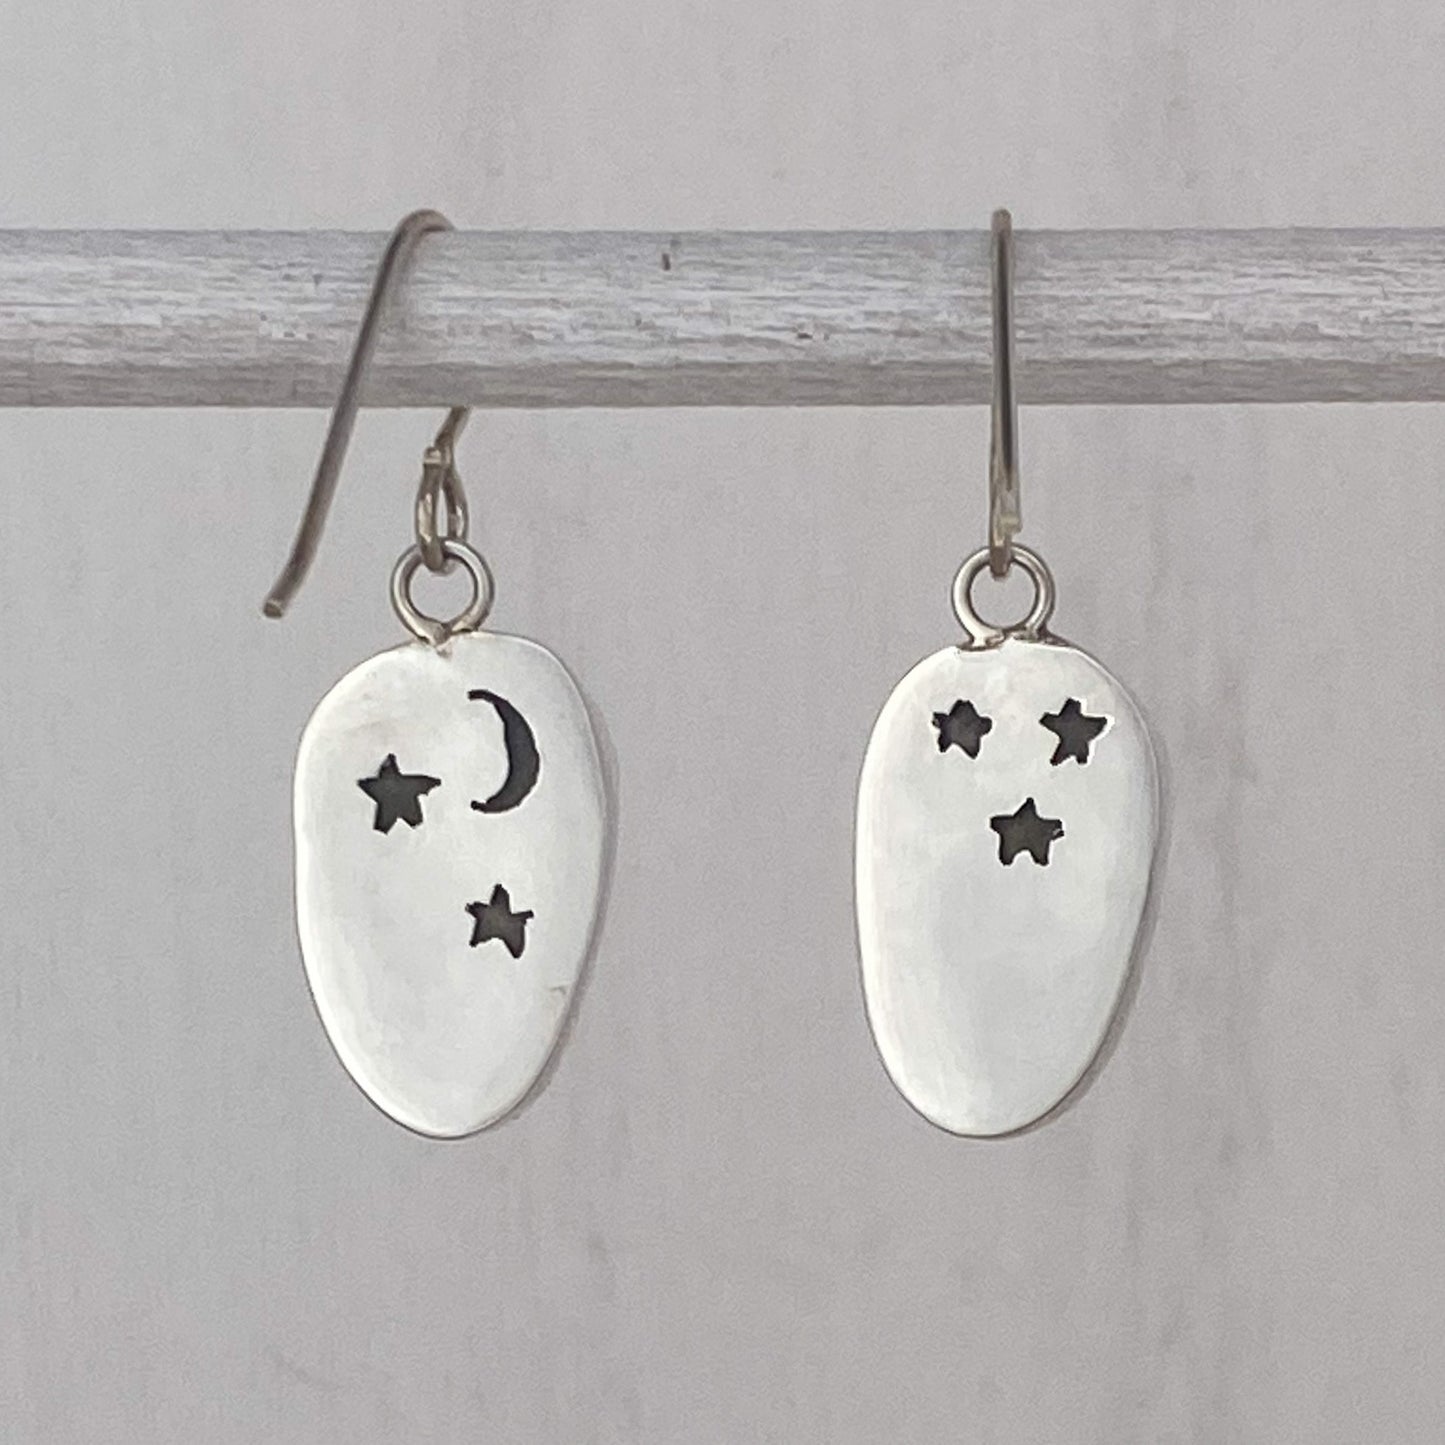 Landscape Jasper Earrings with Stars and Crescent Moon